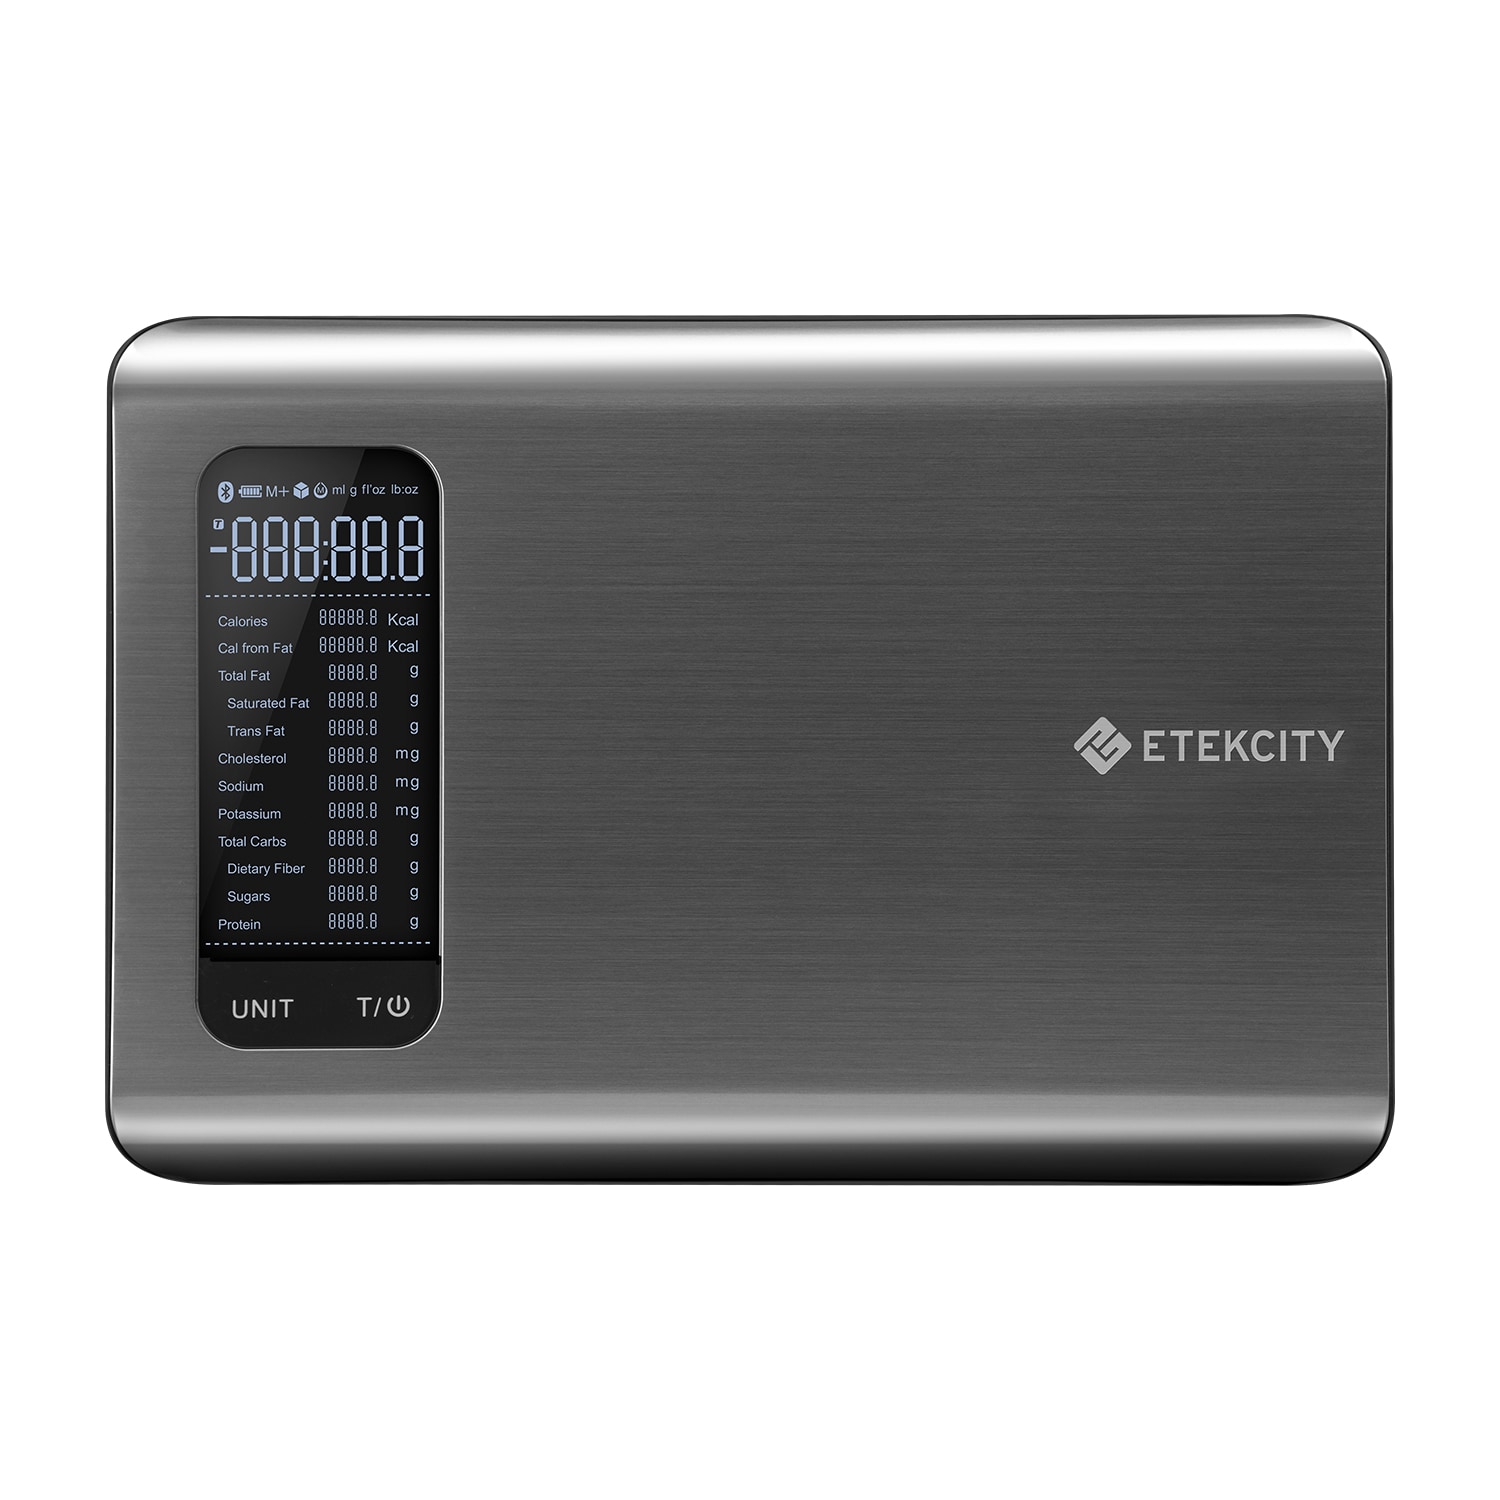 Etekcity Smart Nutrition Scale - Gray, Battery-operated Kitchen